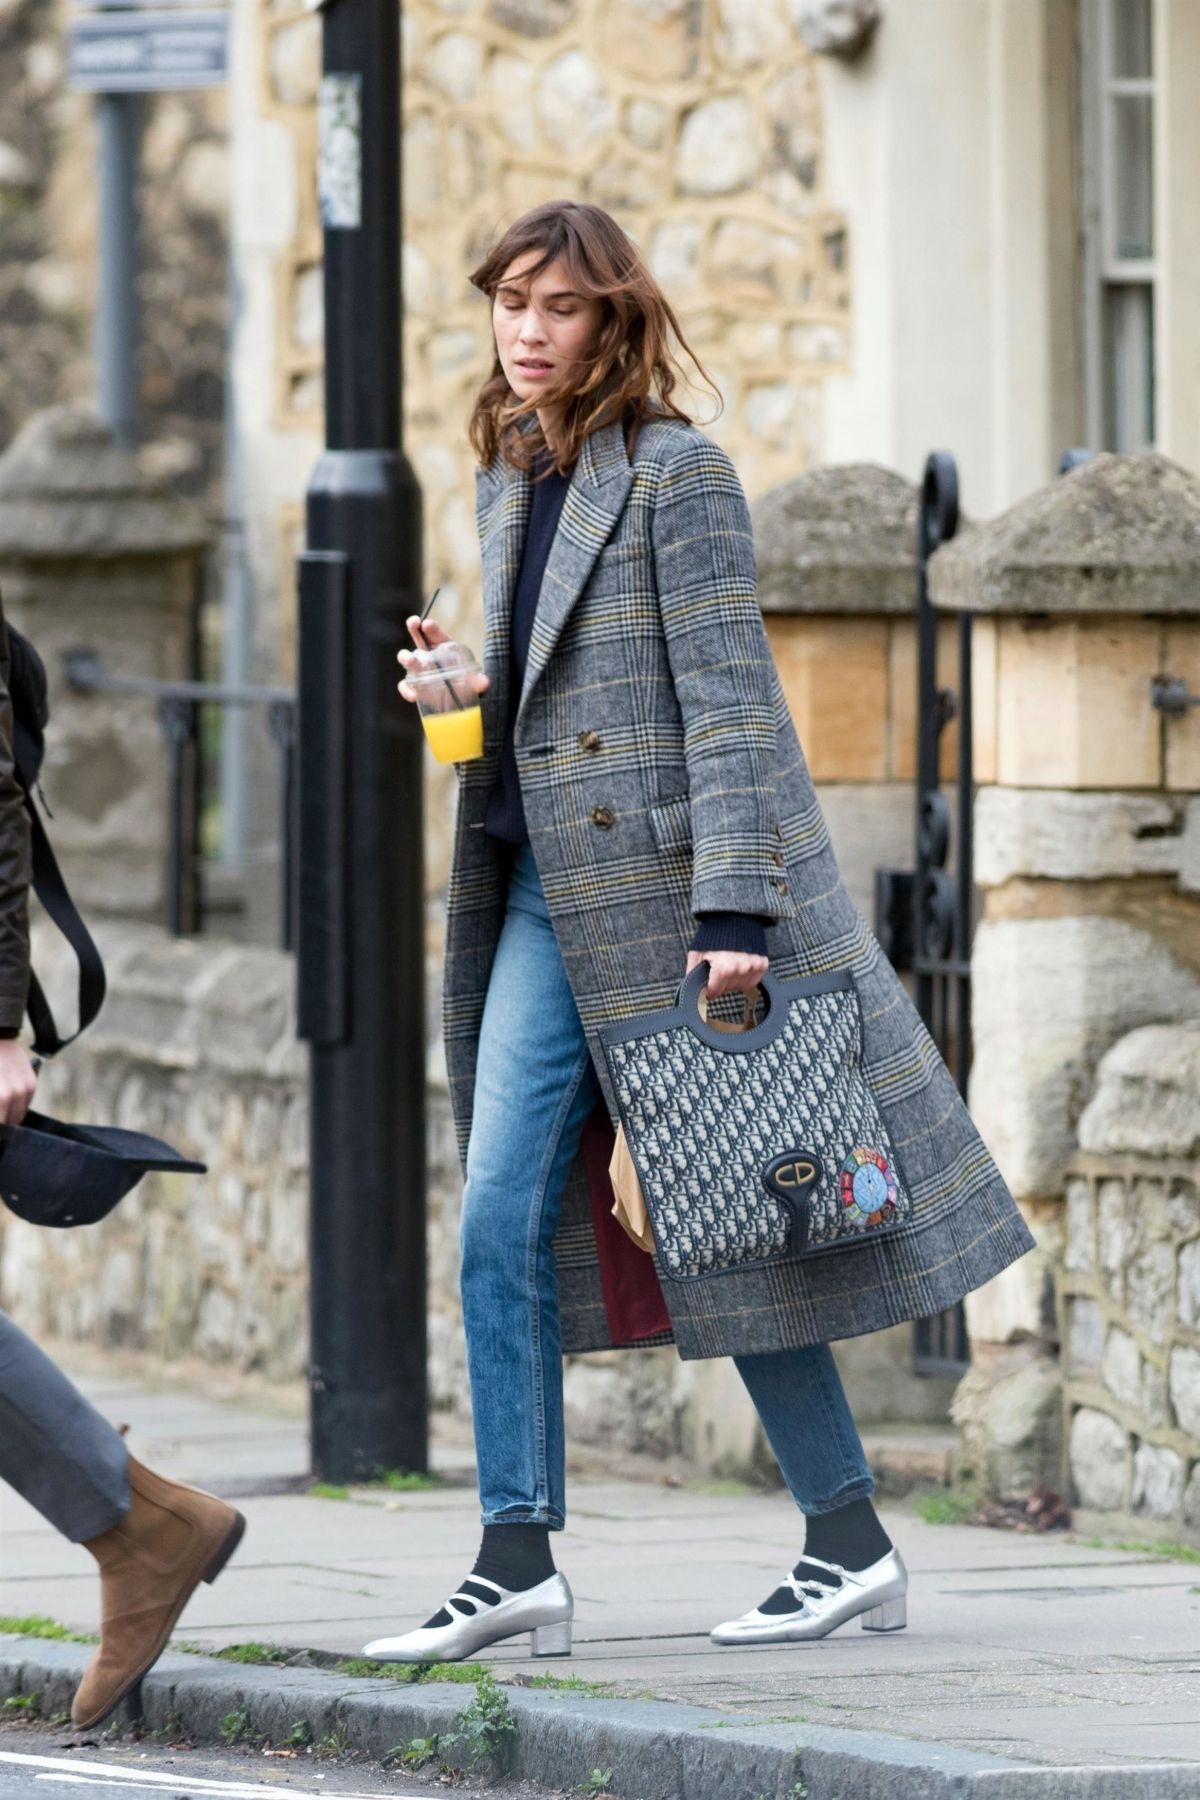 alexa-chung-out-and-about-in-london-03-19-2018-6.jpg